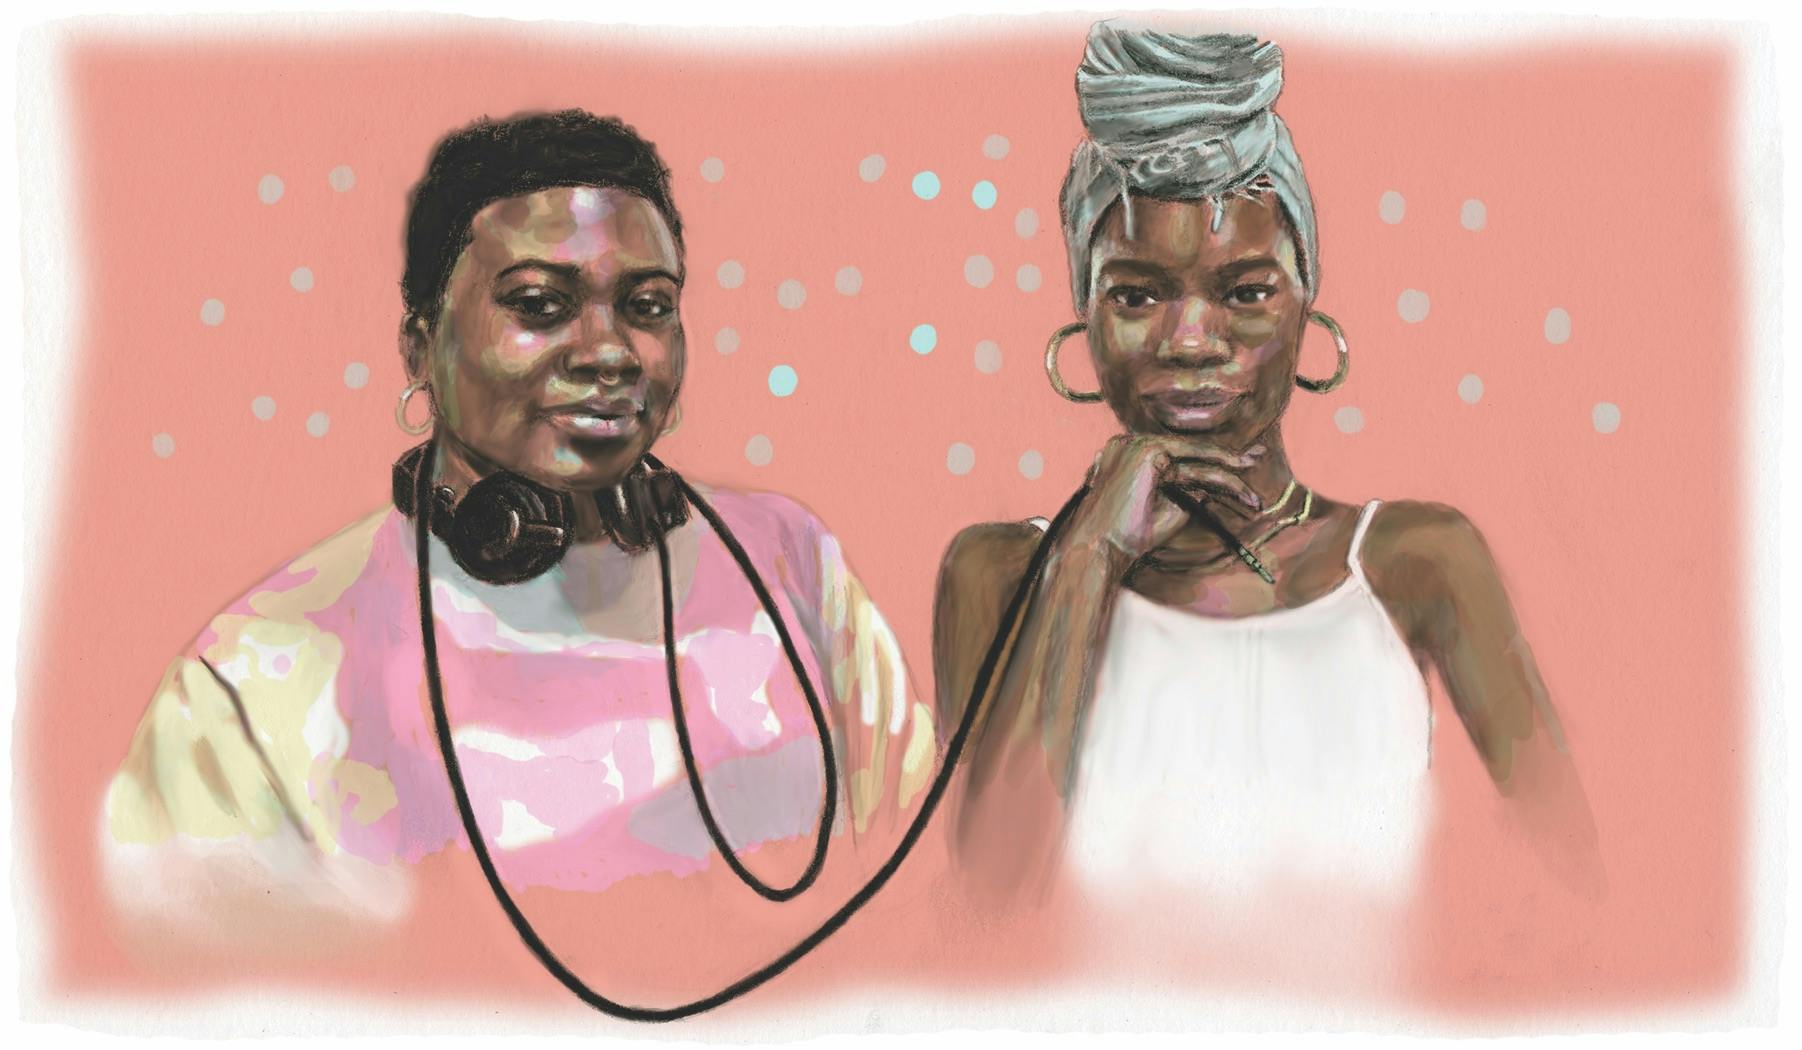 An illustration of two figures, connected by the cord from one individual's headphones.